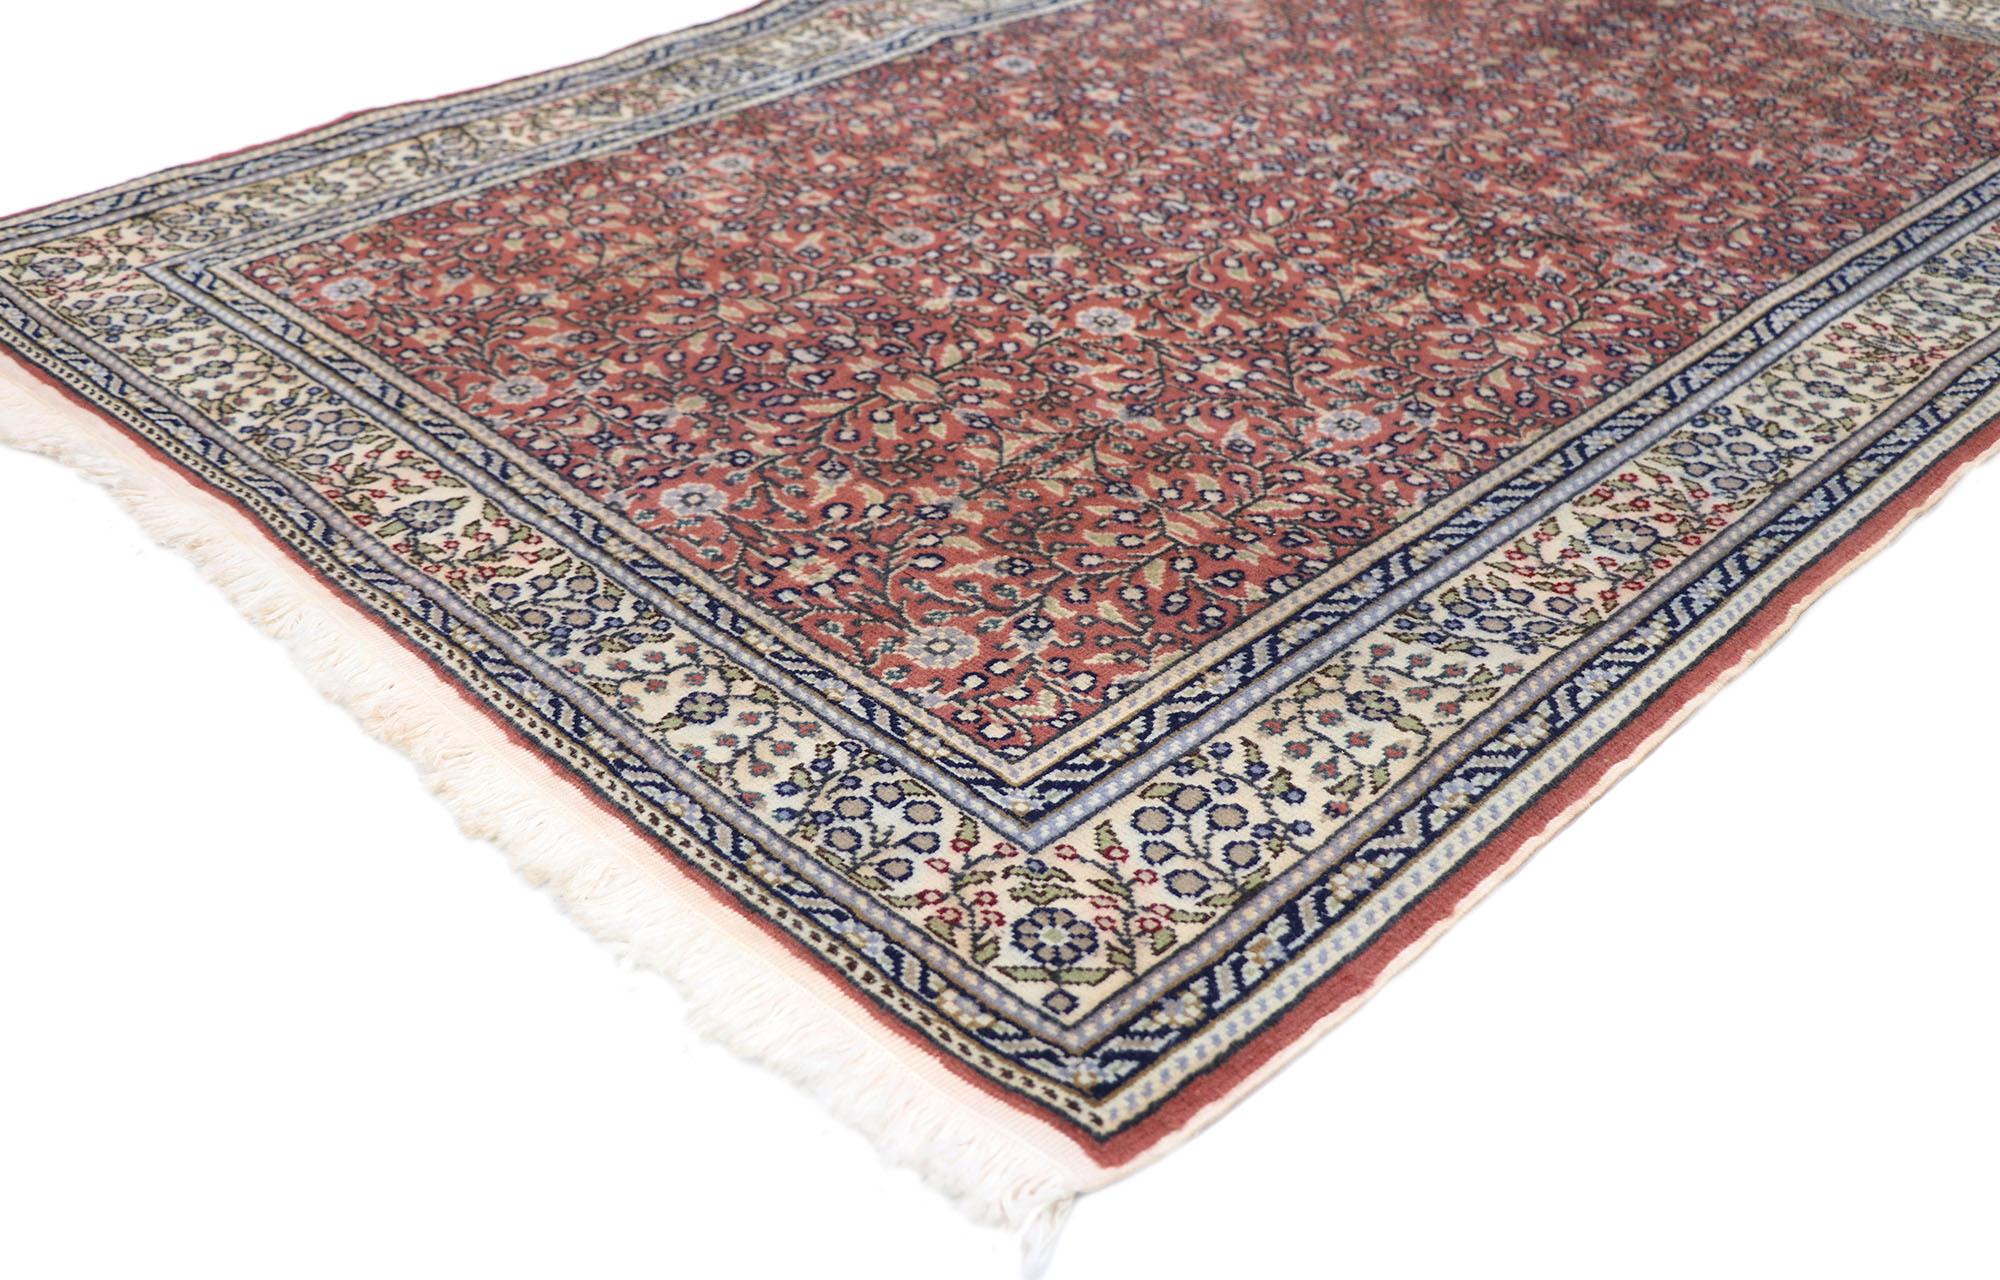 77689 vintage Turkish Sivas rug with Traditional style 03'11 x 05'08. With its effortless beauty and rustic sensibility, this hand knotted wool vintage Turkish Sivas rug beautifully embodies traditional style. The abrashed brick red field features